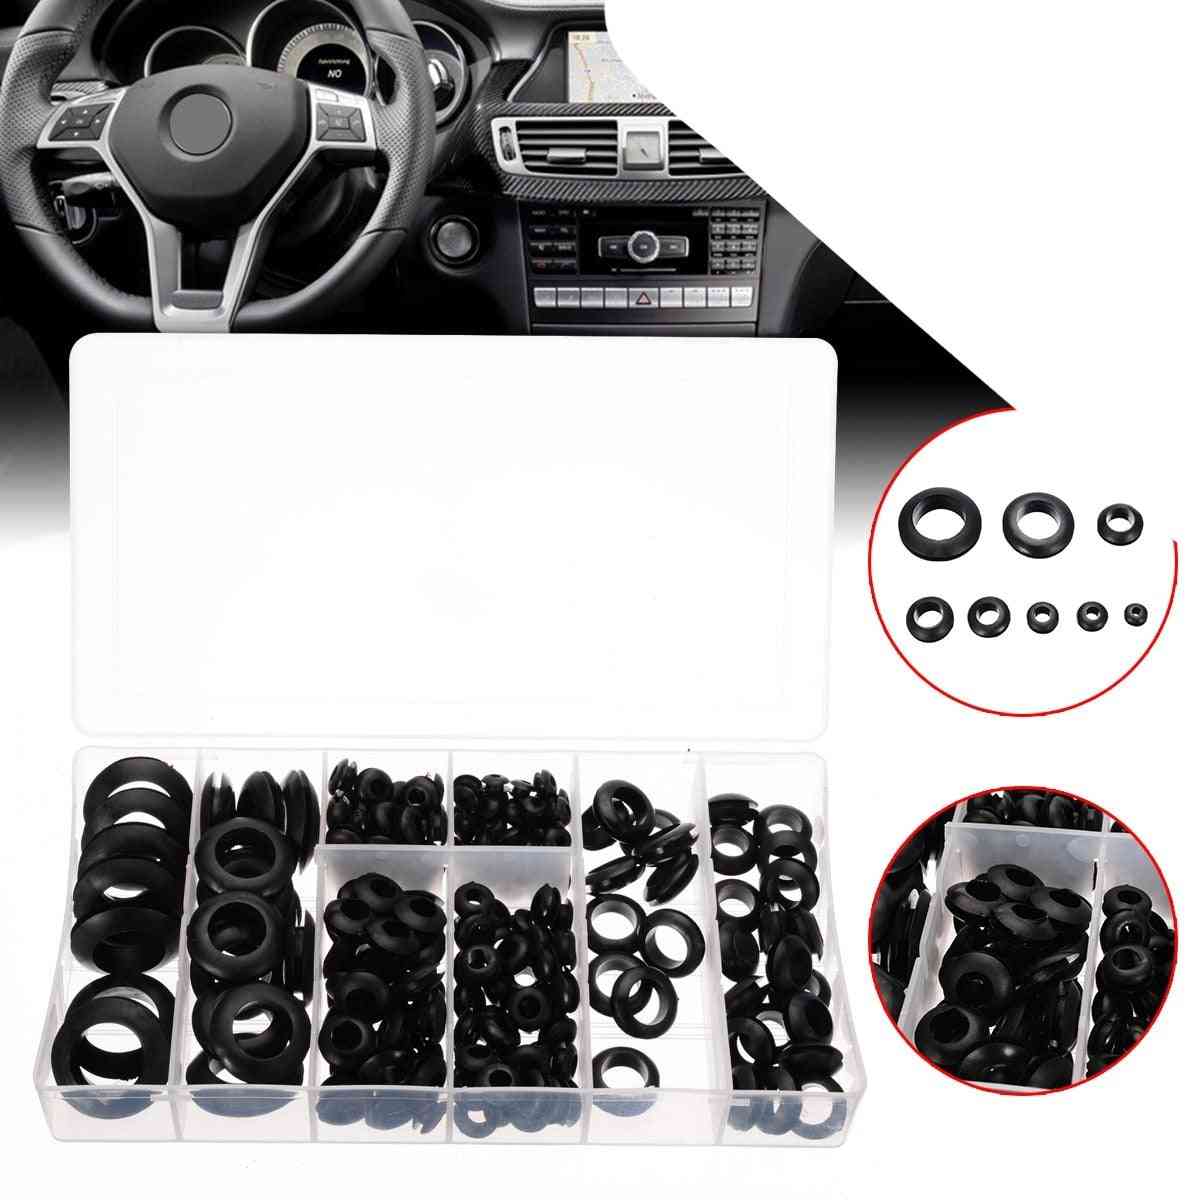 Rubber Grommet Assortment Set - Electrical Wire Gasket Kit